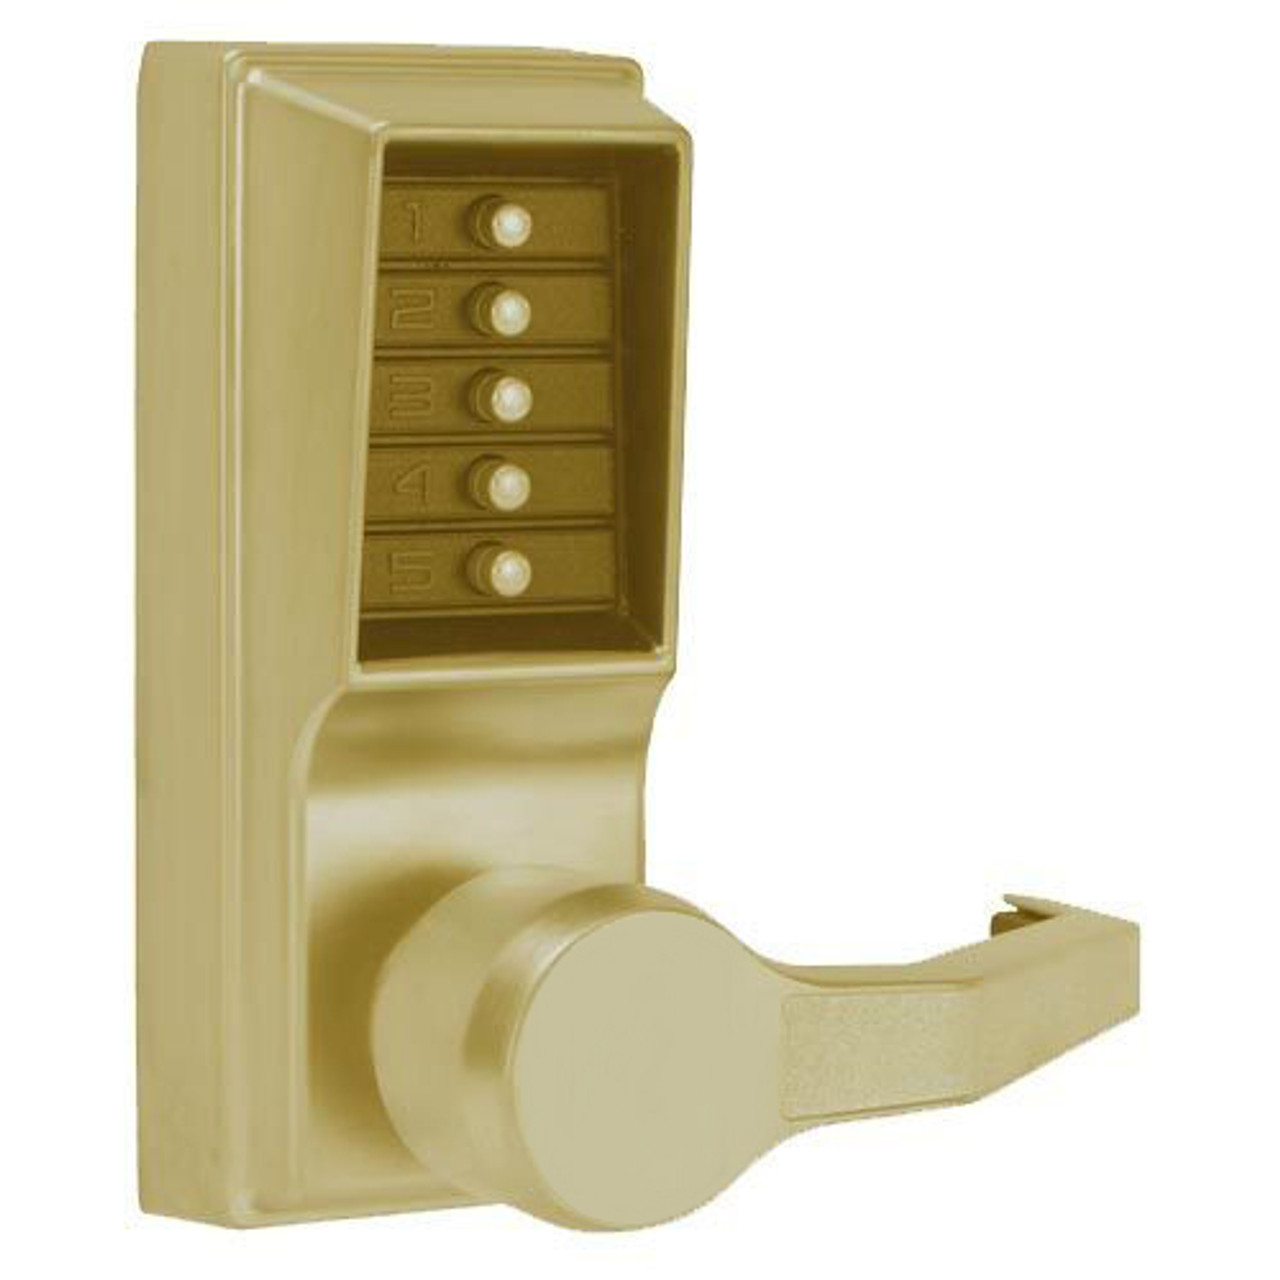 LR1011-05-41 Simplex Pushbutton Lever Lock with No Key Override in Antique Brass